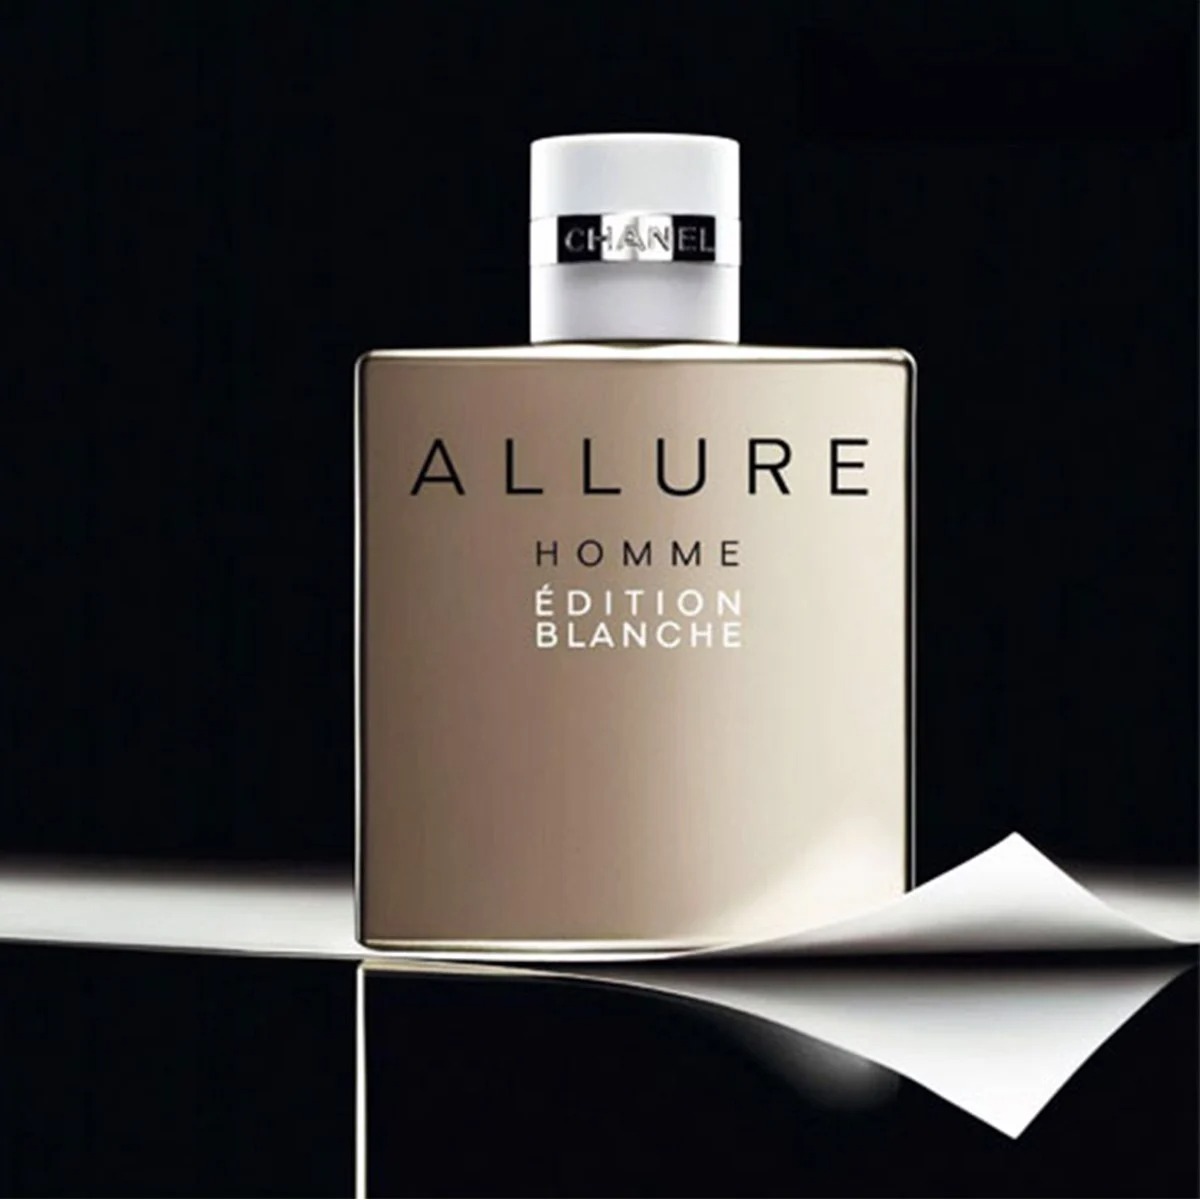 Chanel Allure Homme Edition Blanche edp